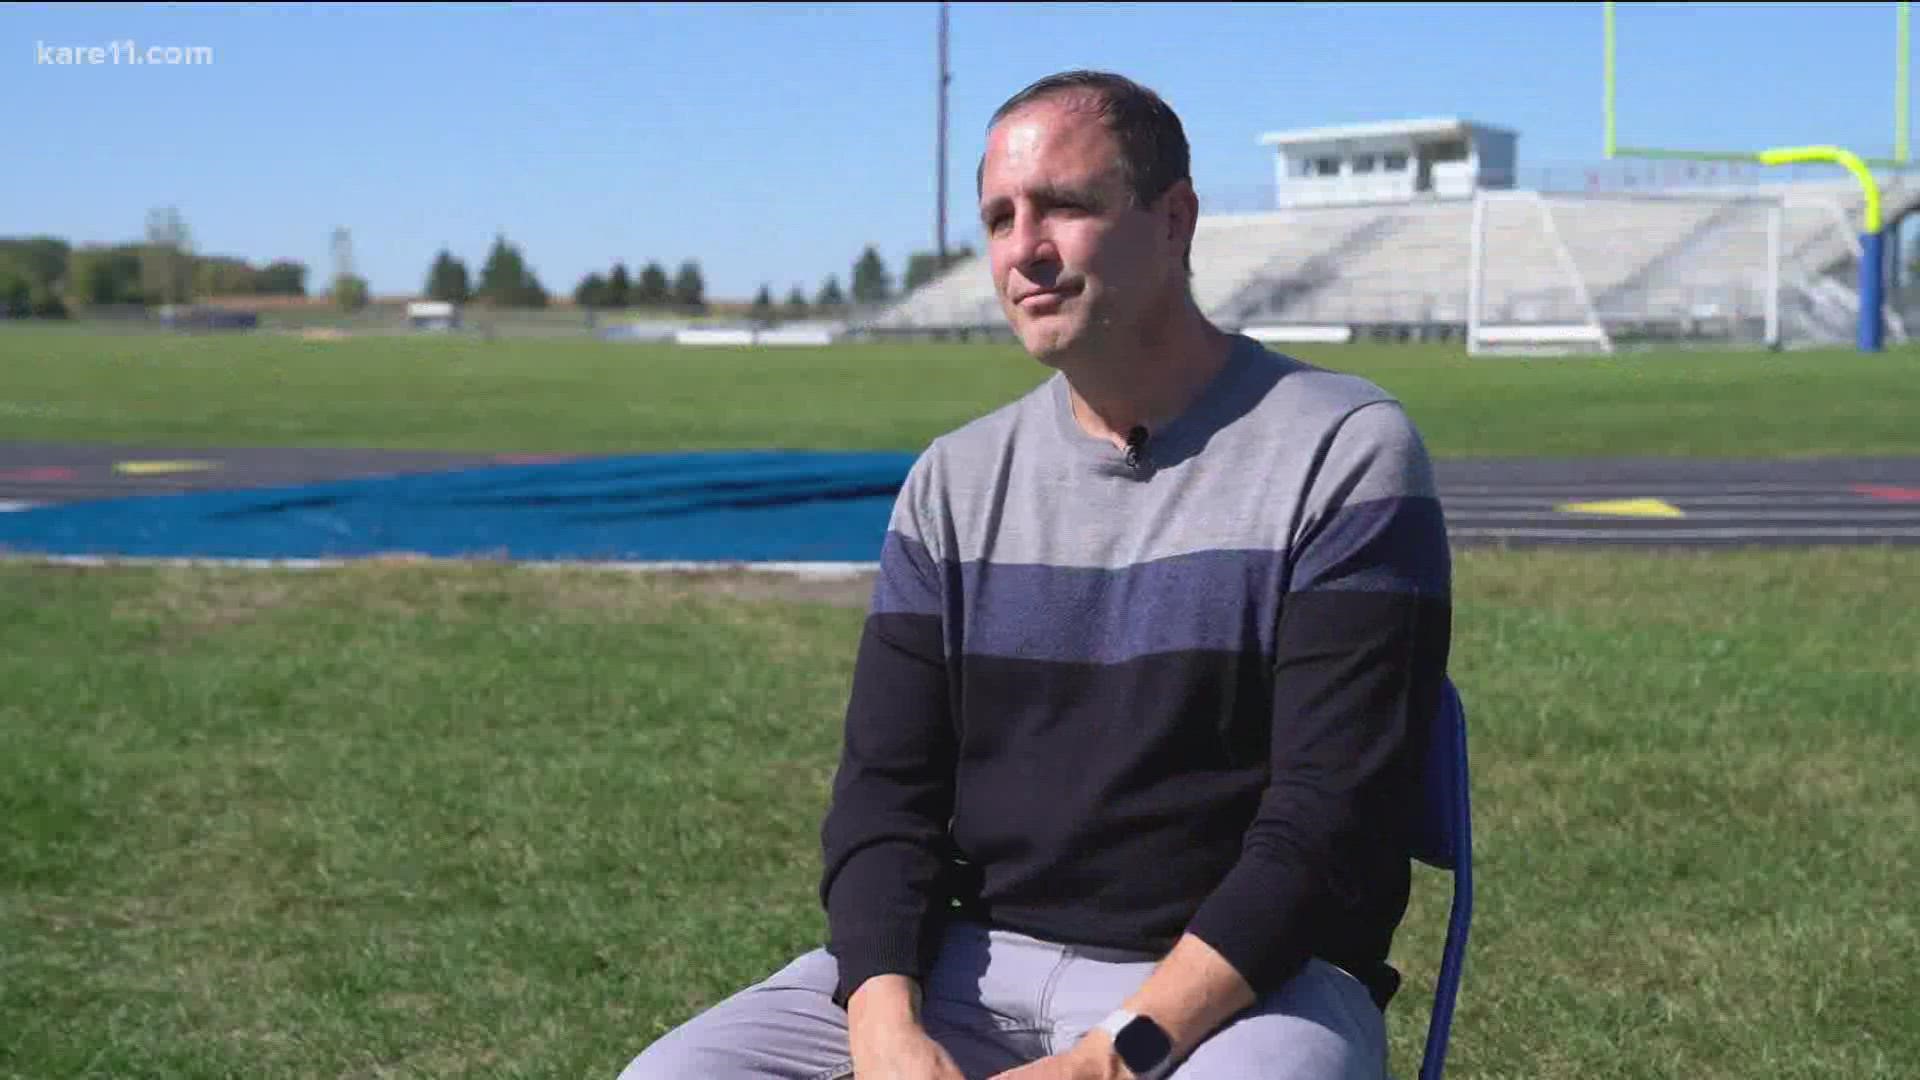 "I'm in bonus time now. I feel blessed to be here," Brad Wendland told KARE 11's Randy Shaver on his first day back in the classroom and the football field.